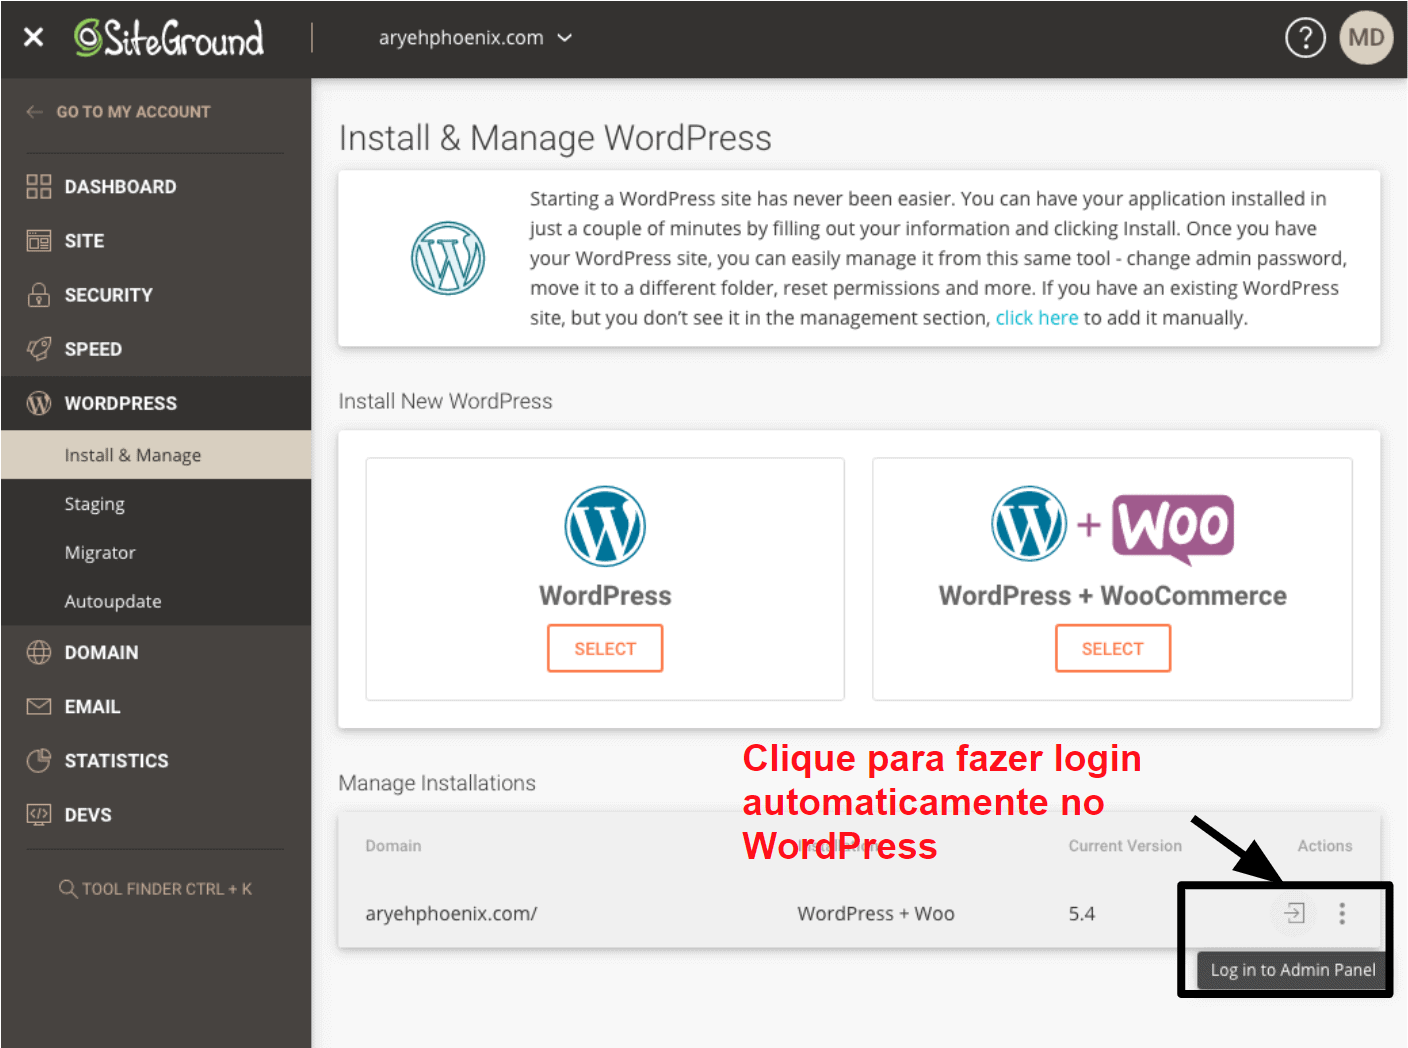 SiteGround offers a one click login option for your WordPress dashboard PT15